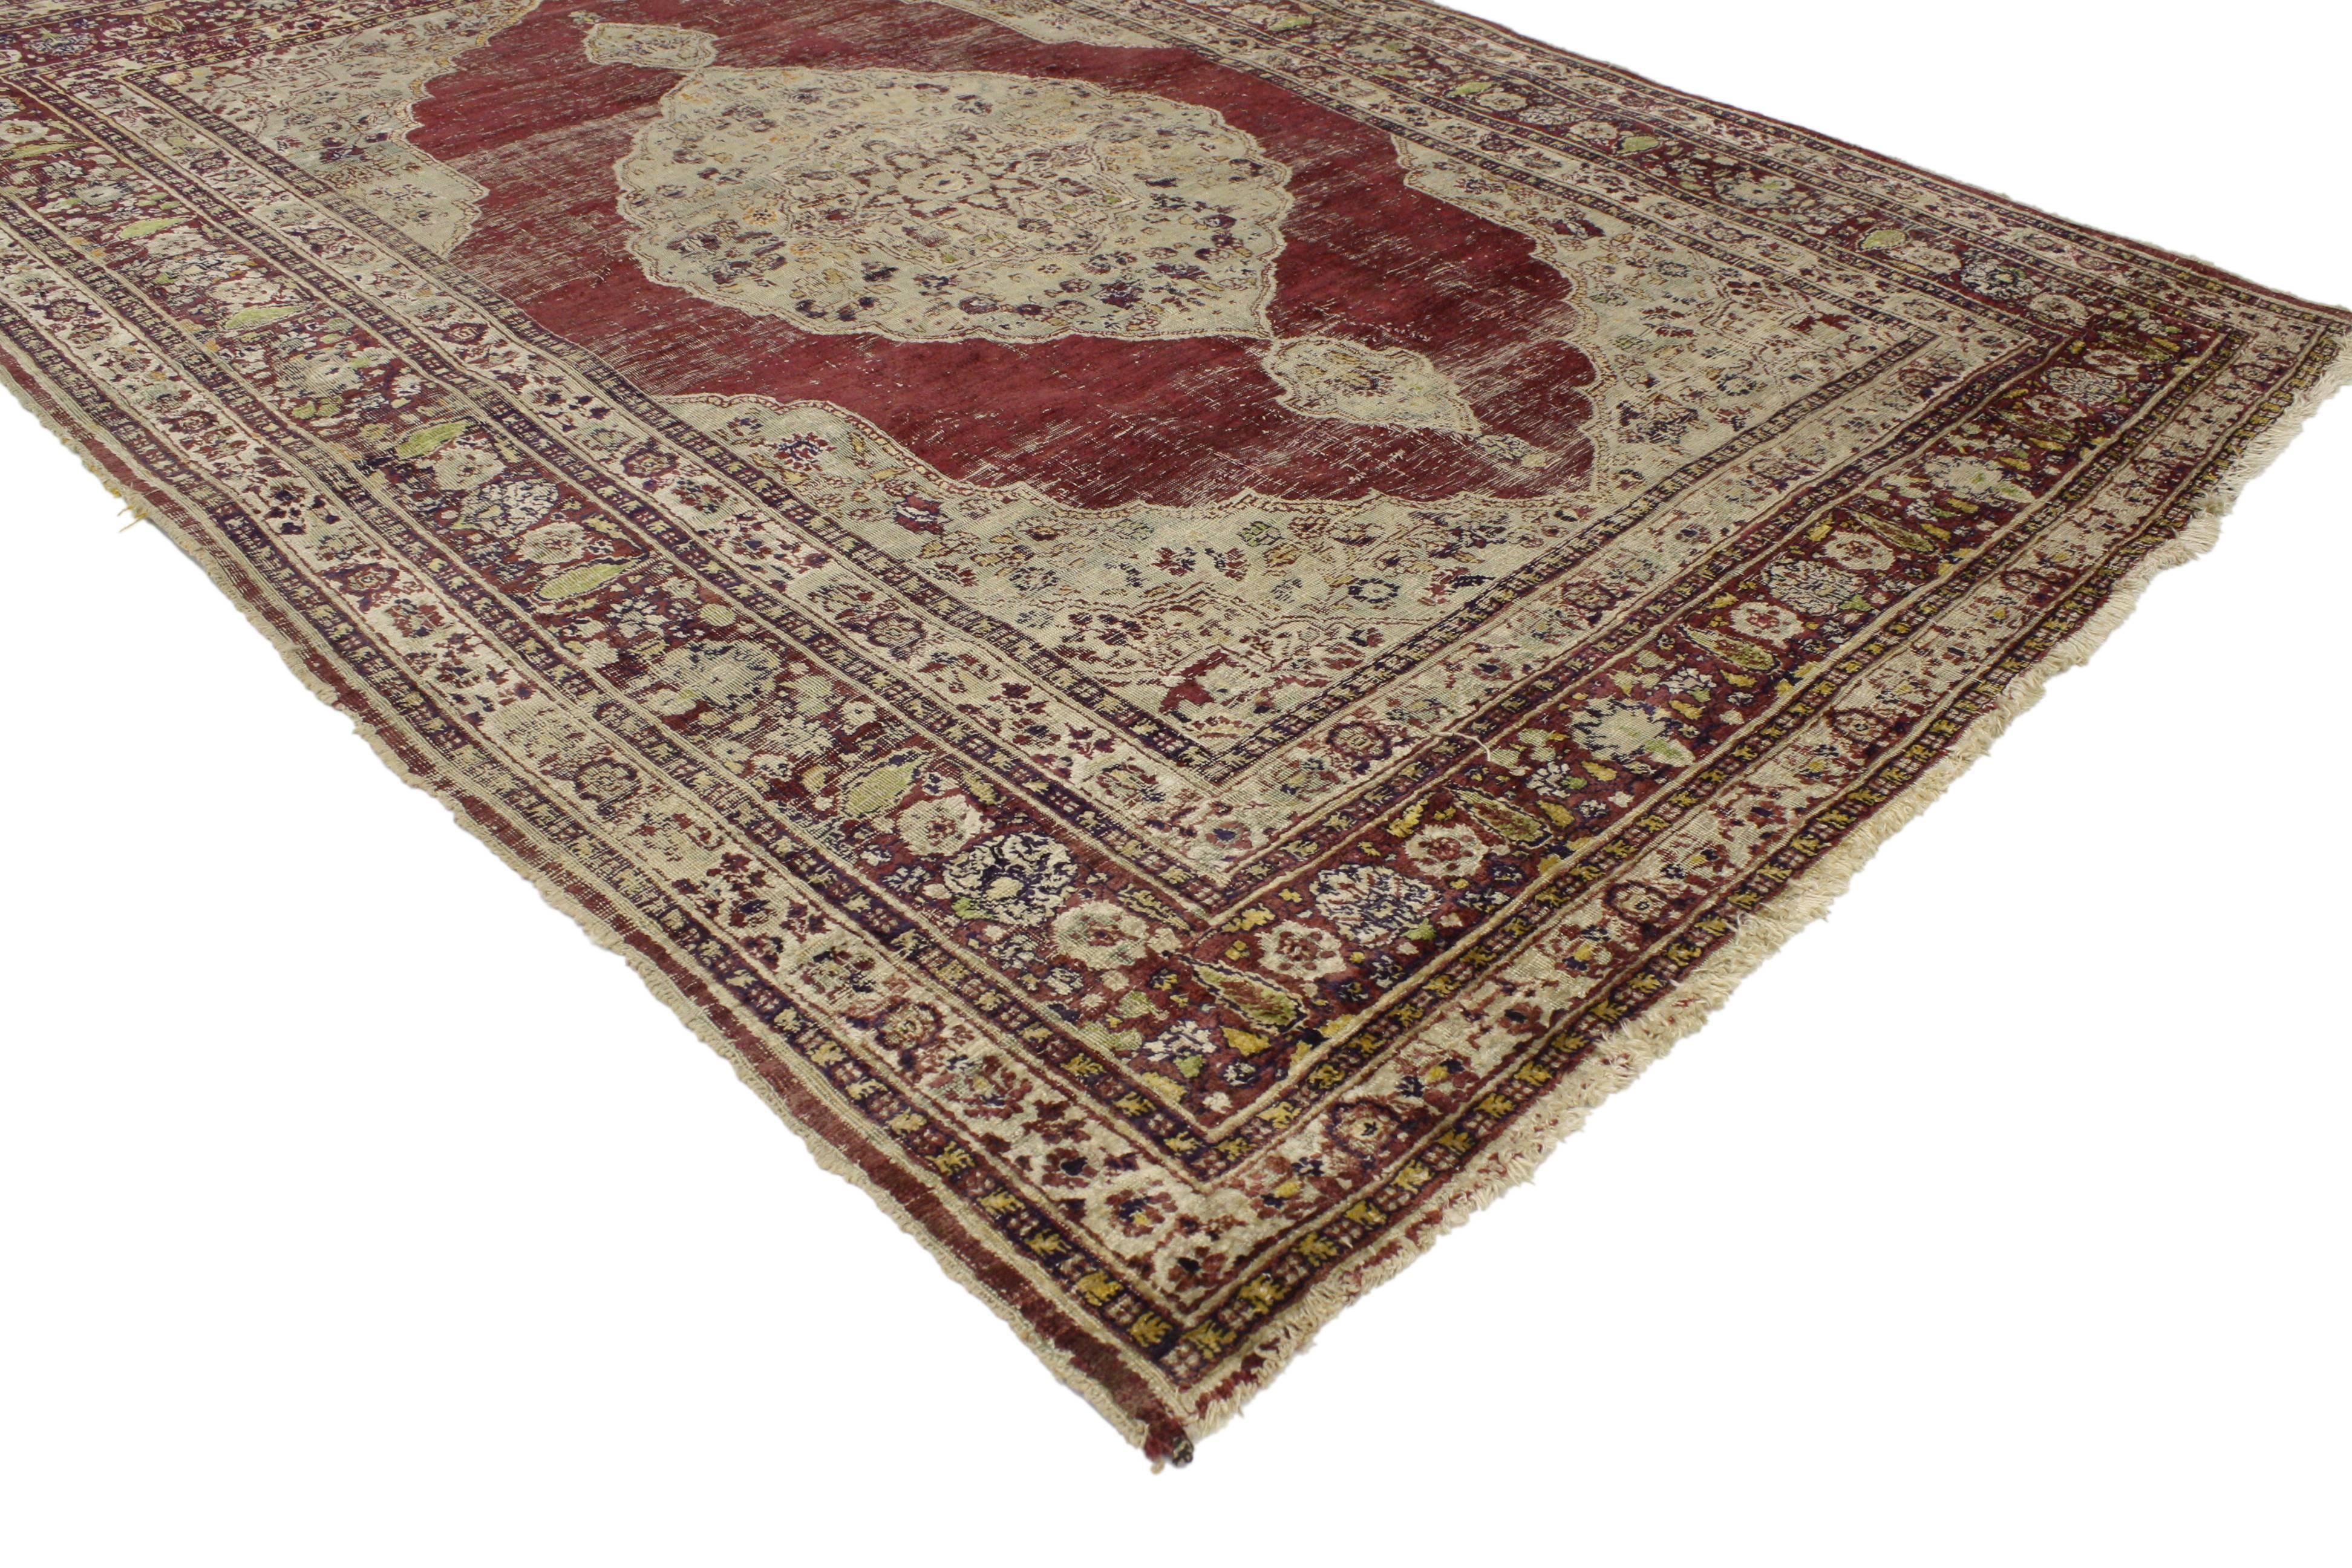 76953 Distressed Vintage Persian Silk Tabriz Rug with Modern Industrial Style. This charming vintage Persian silk Tabriz rug features a grand medallion with two cartouche finials in a red field surrounded by complementary spandrels and equally